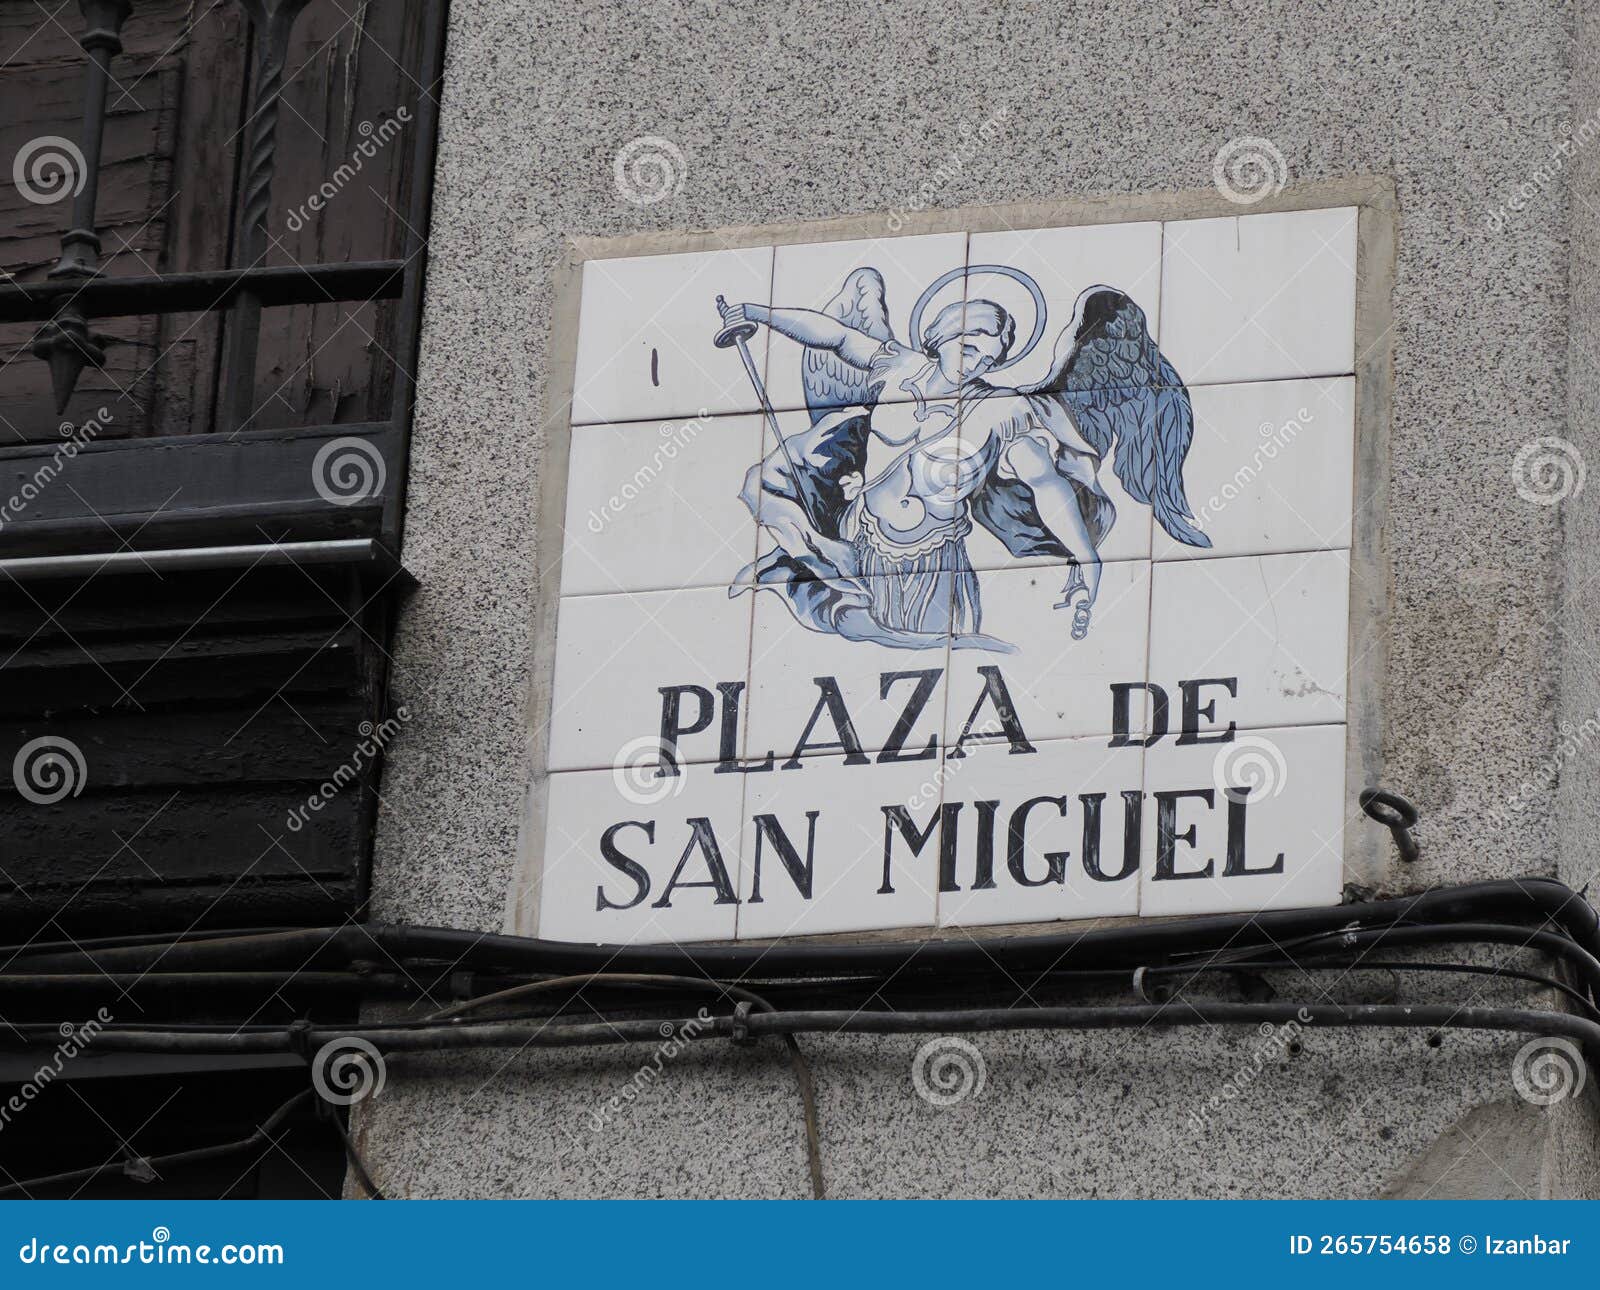 madrid, spain - december 14, 2022: street name plaza de san miguel sign on in madrid, capital of spain renowned for its rich